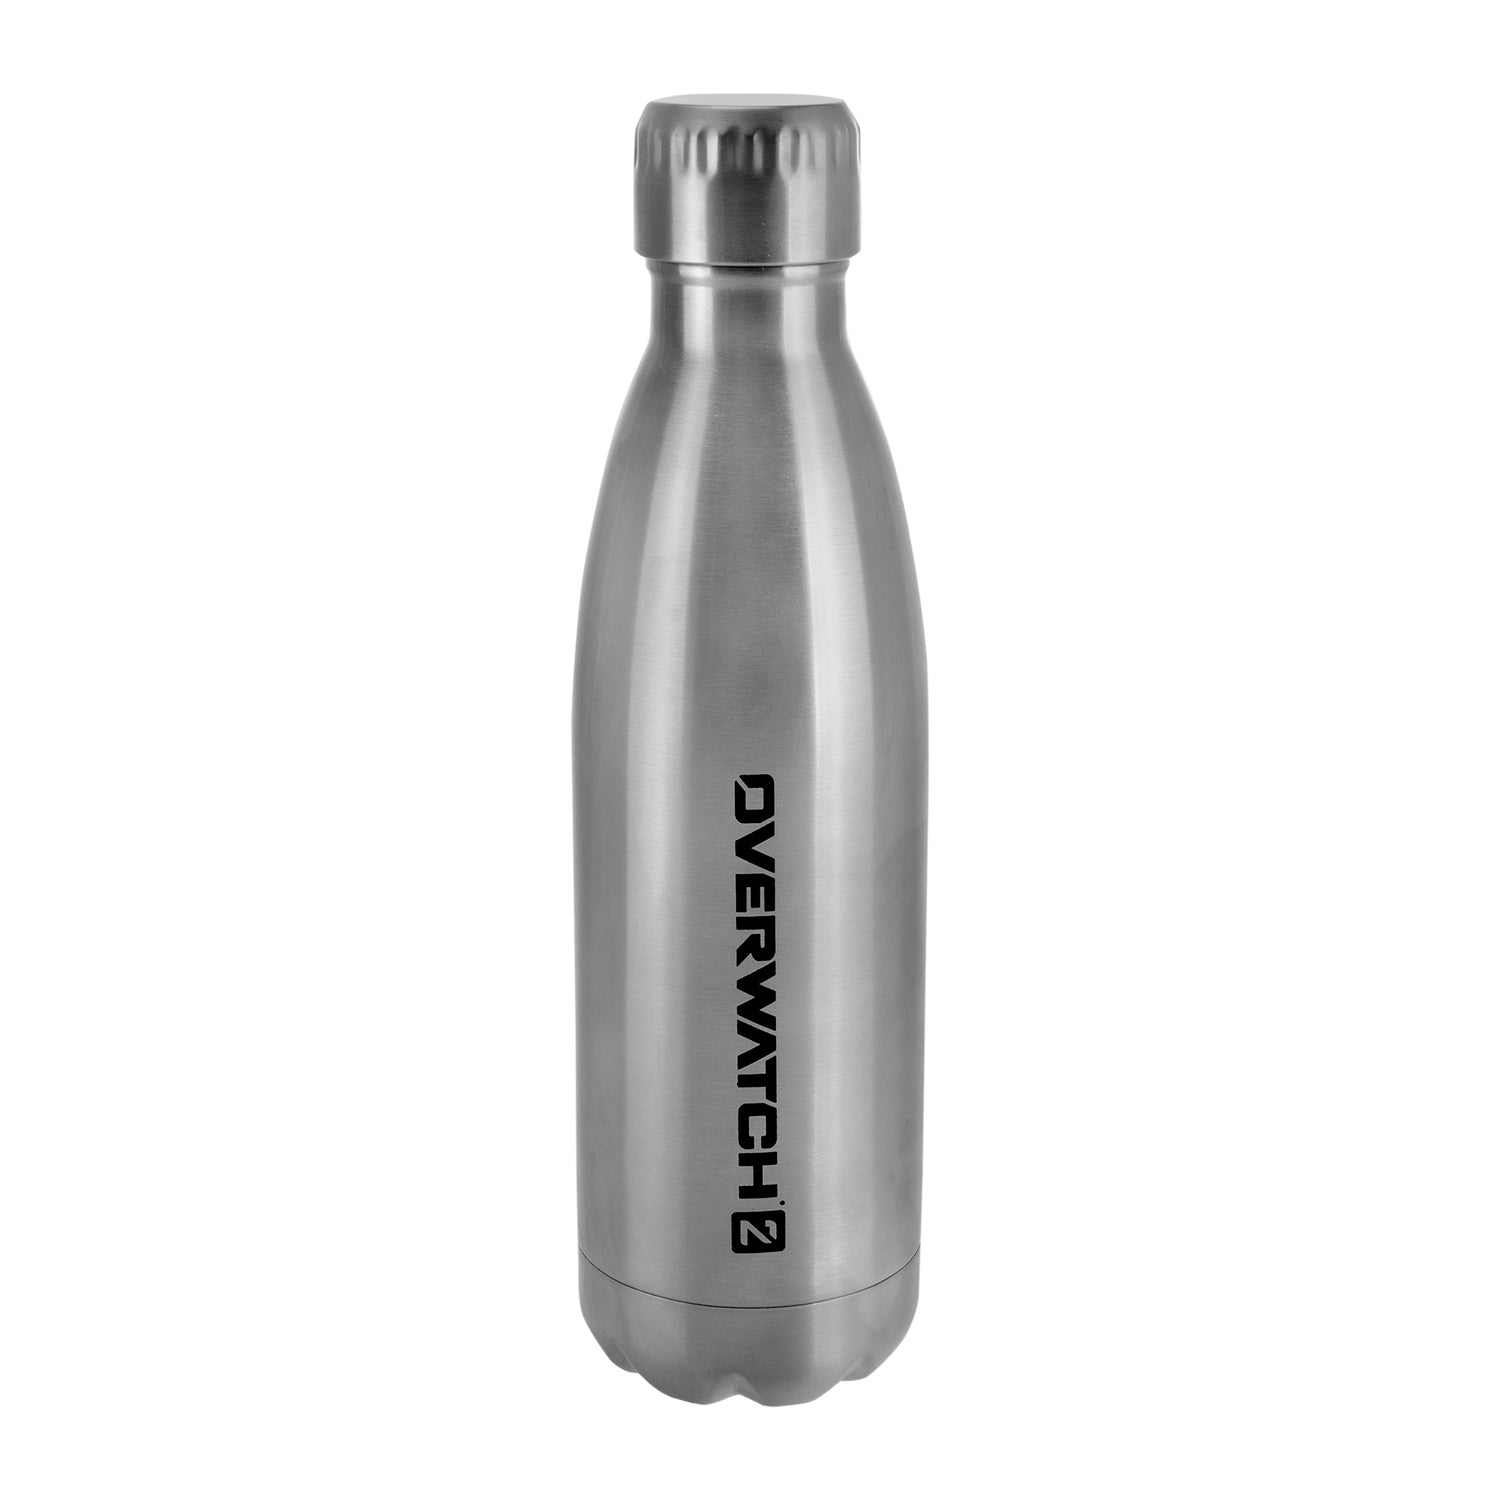 Overwatch 2 500ml Stainless Steel Water Bottle - Back View